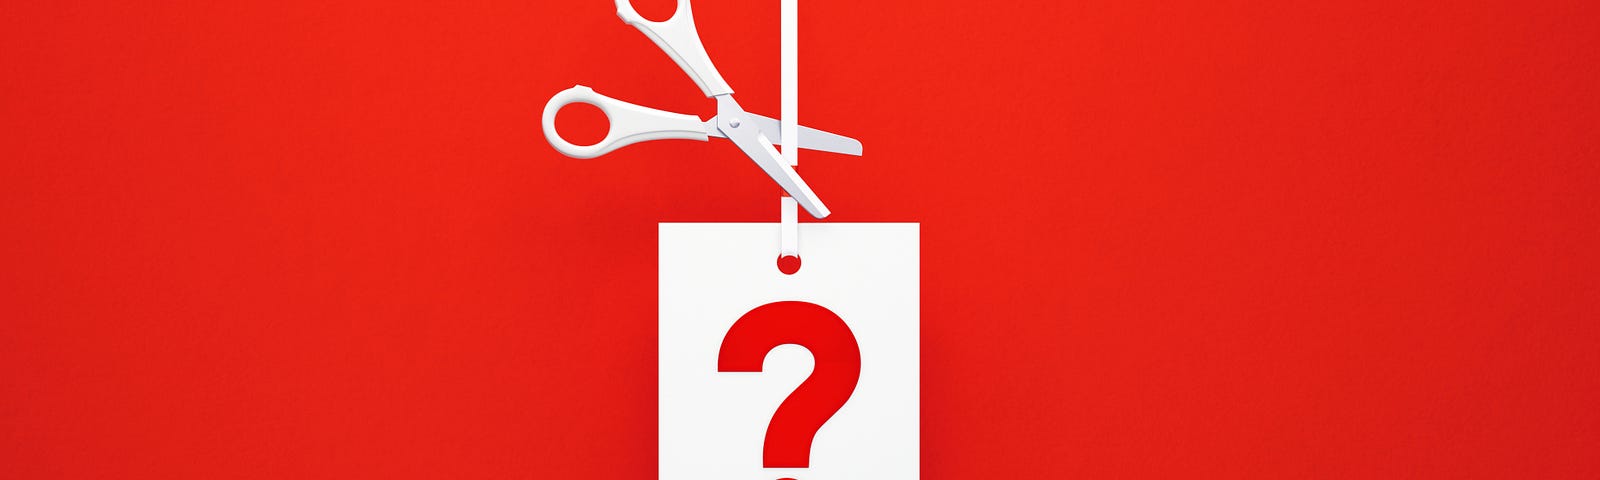 A white image of a pair of scissors poised to cut the string on a label with a question mark on it against a red background.